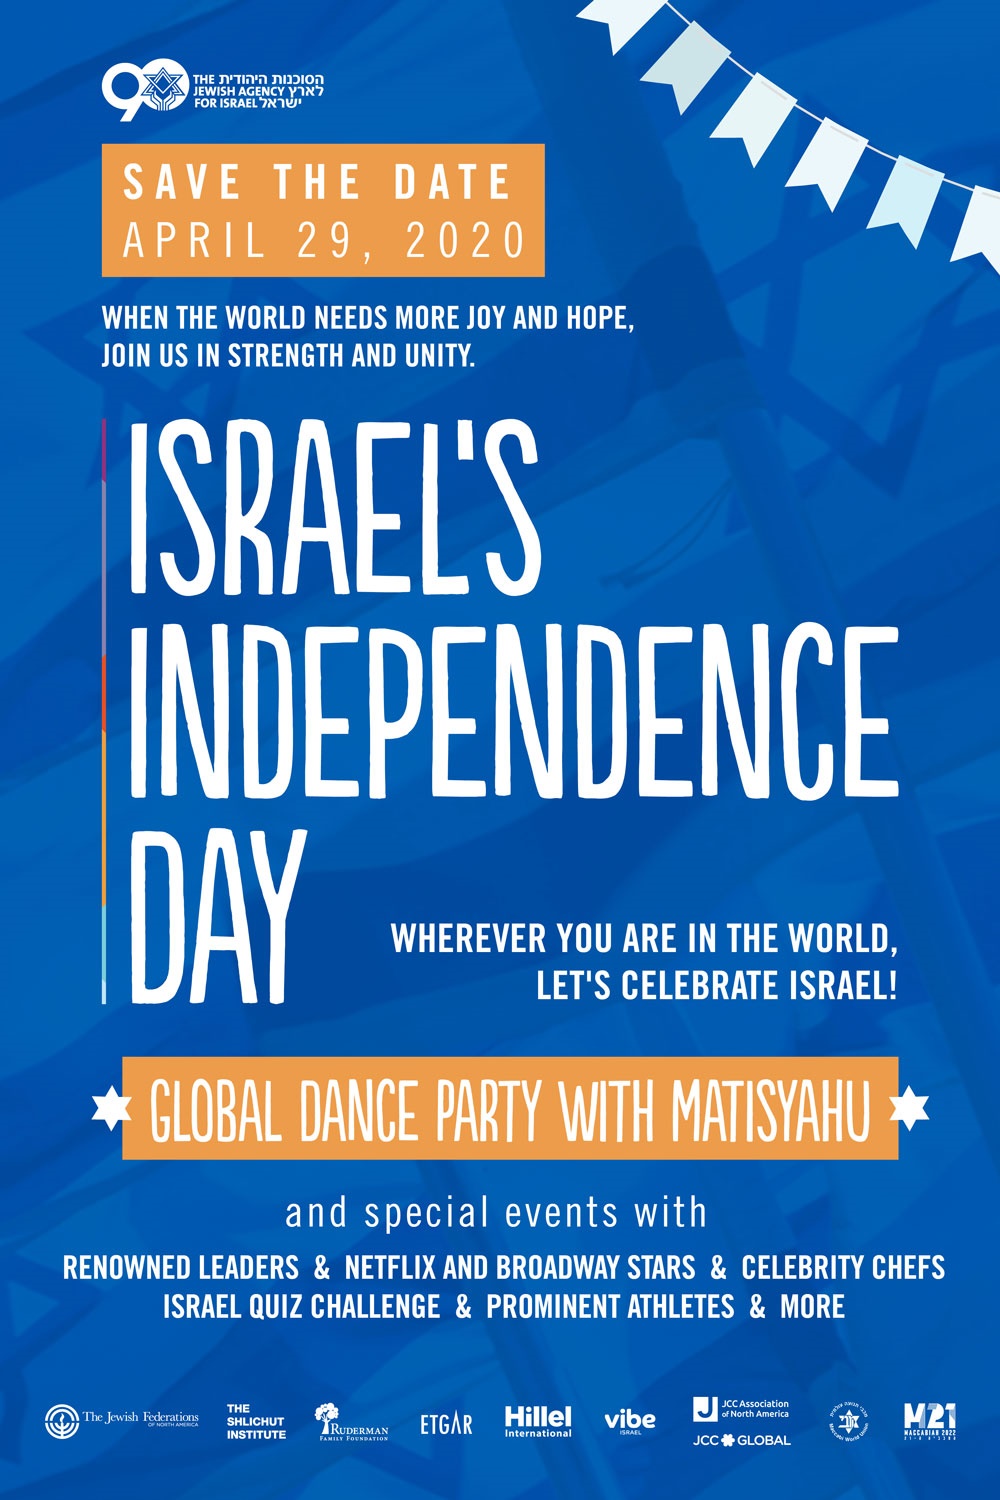 A Global Celebration on Israel's Independence Day